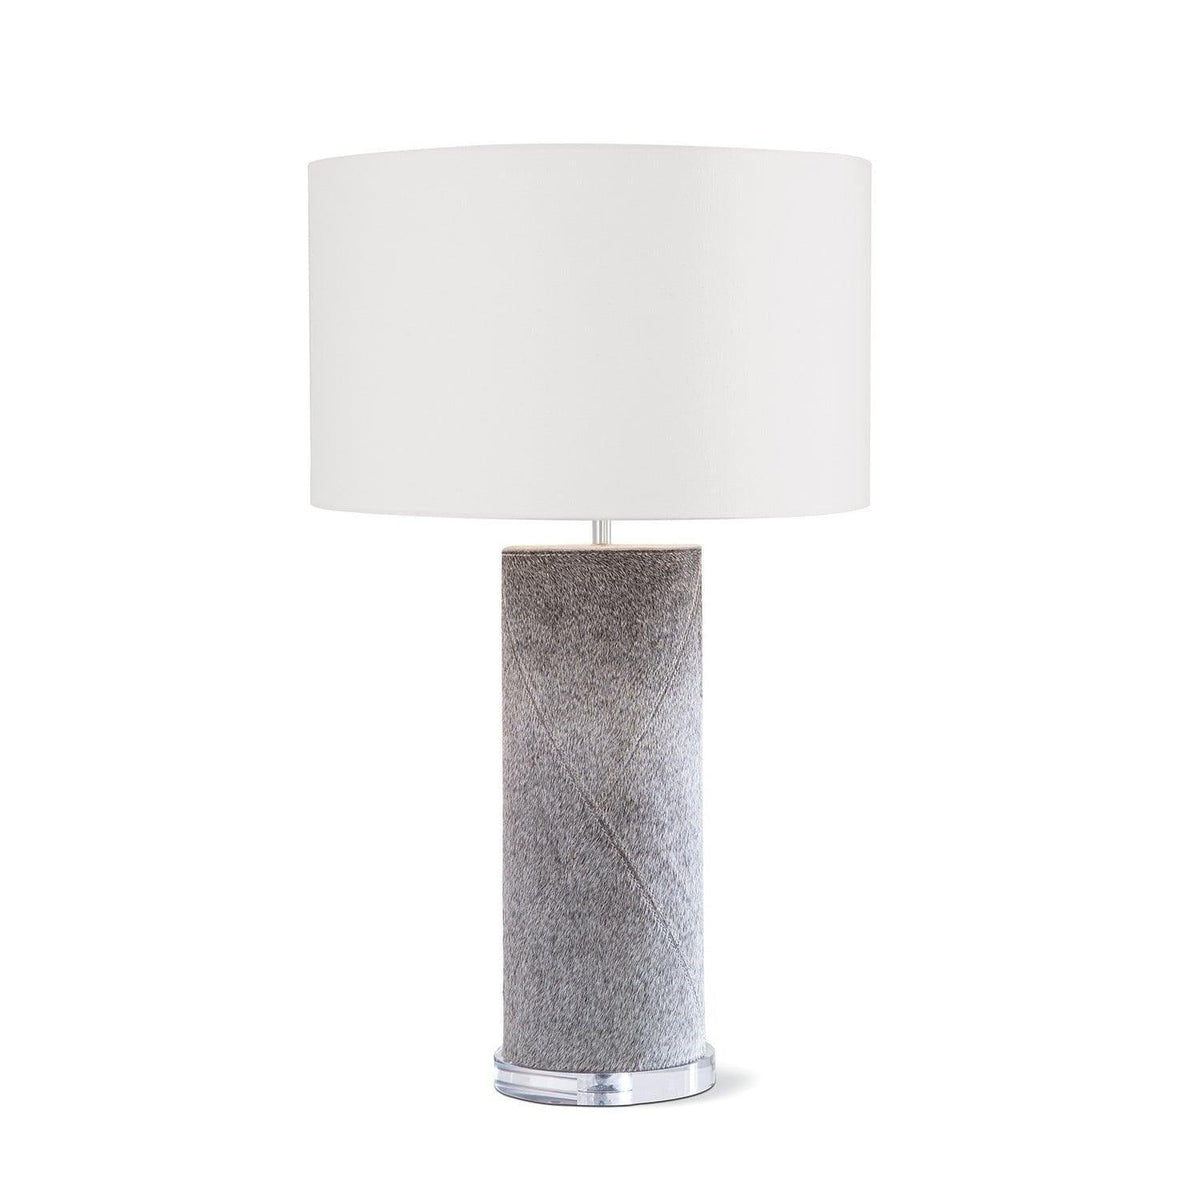 Regina Andrew - Andres Column Table Lamp - 13-1565GRY | Montreal Lighting & Hardware